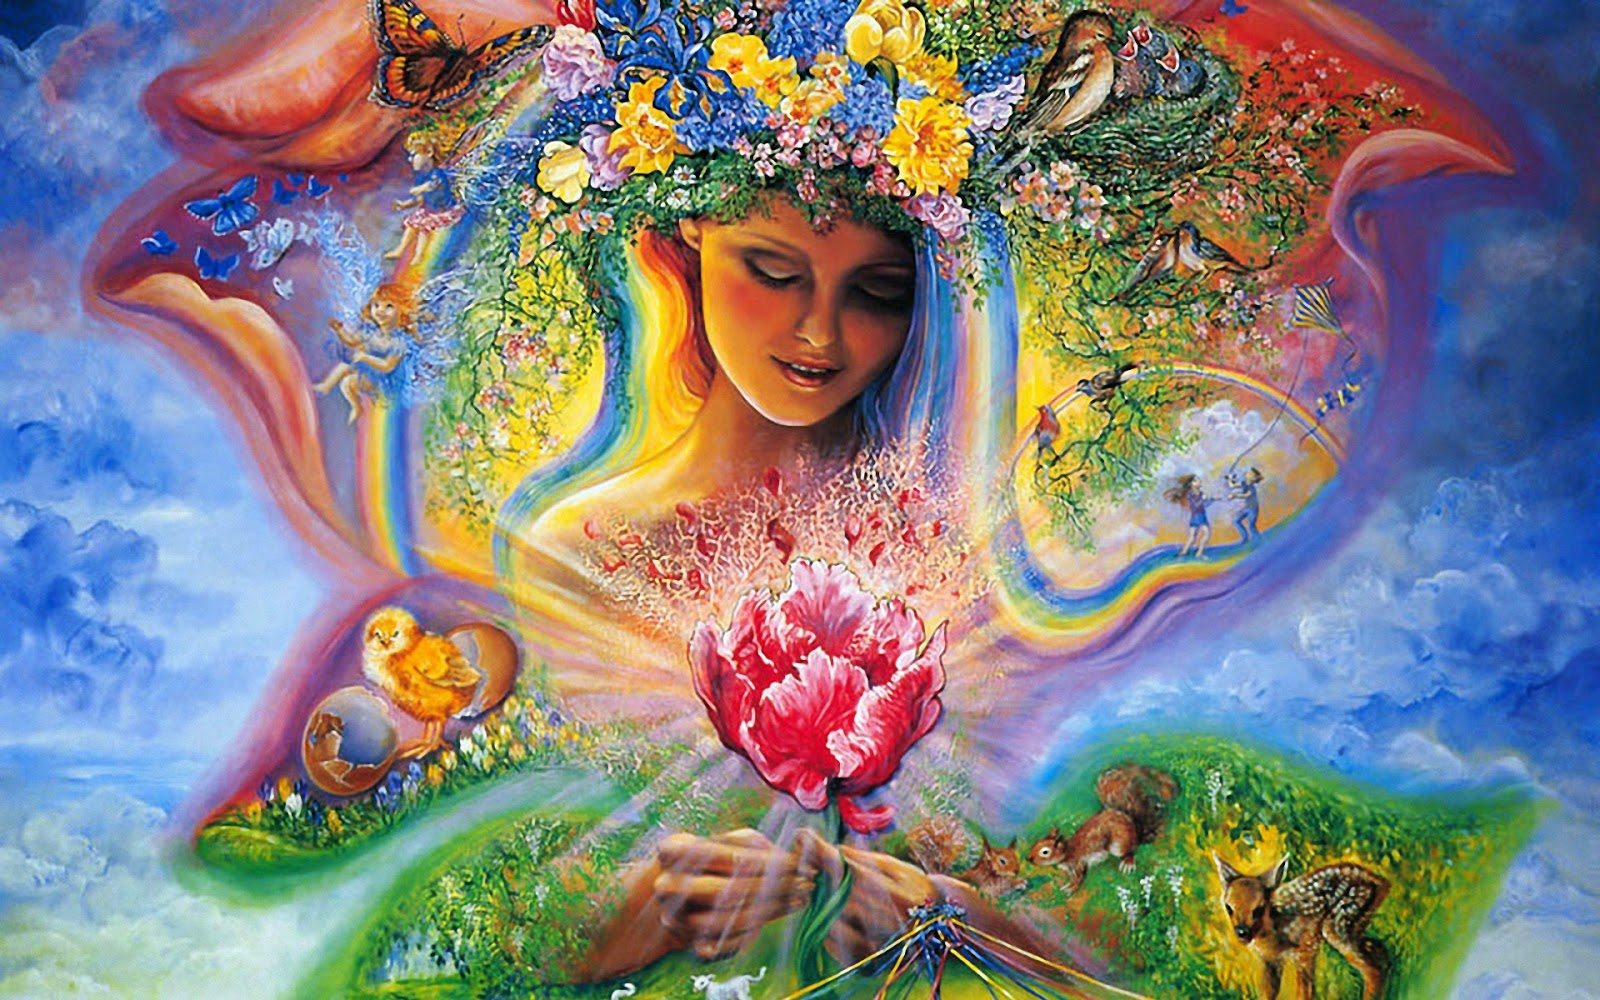 Art for your wallpaper: [FANTASY ART] [PAINTING] Josephine Wall